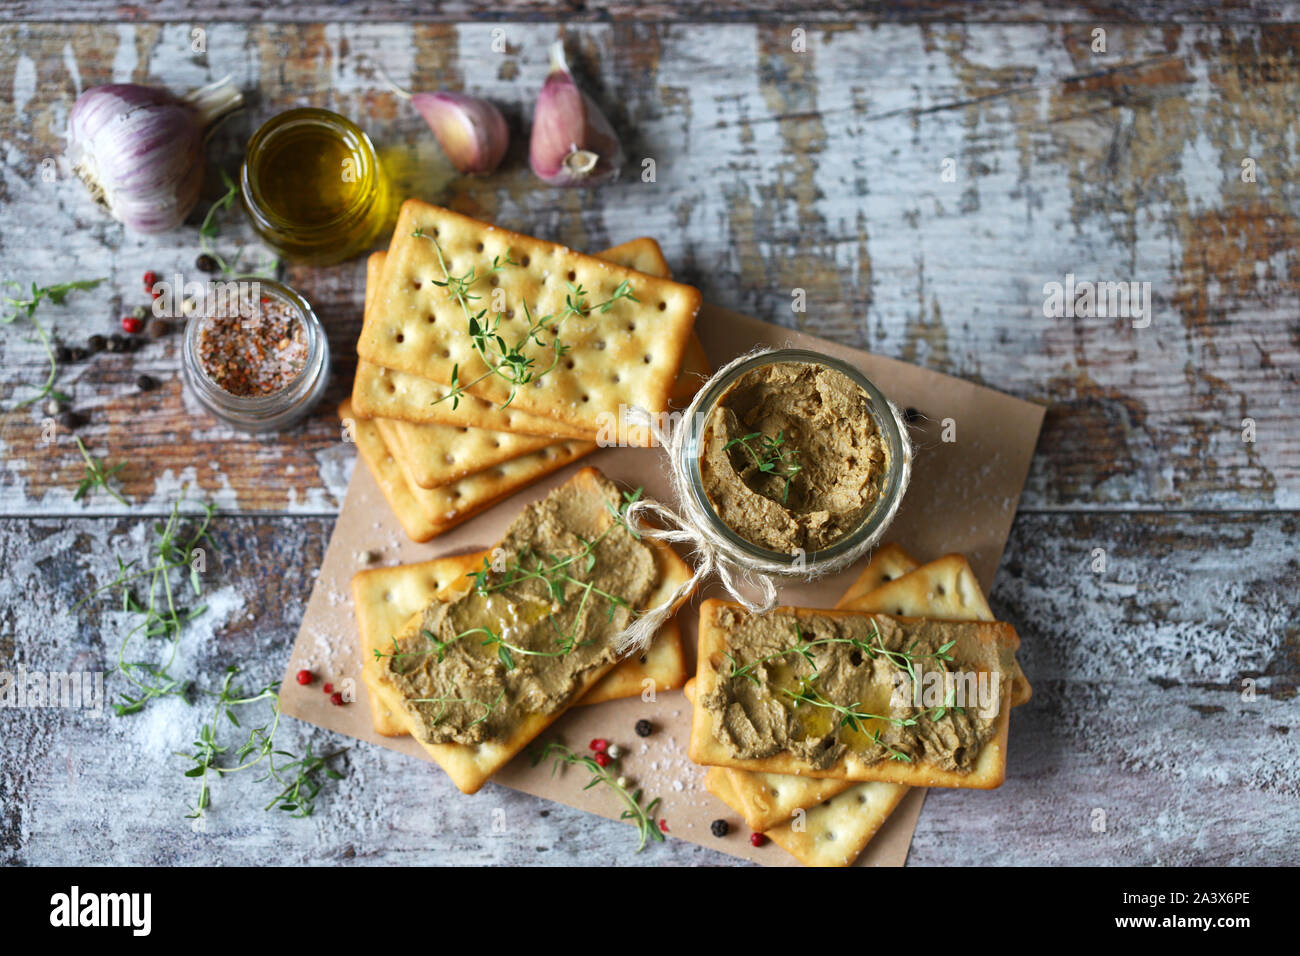 Homemade liver pate. Delicious homemade pate with spices and herbs. Keto diet. Healthy food. Selective focus. Macro. Stock Photo